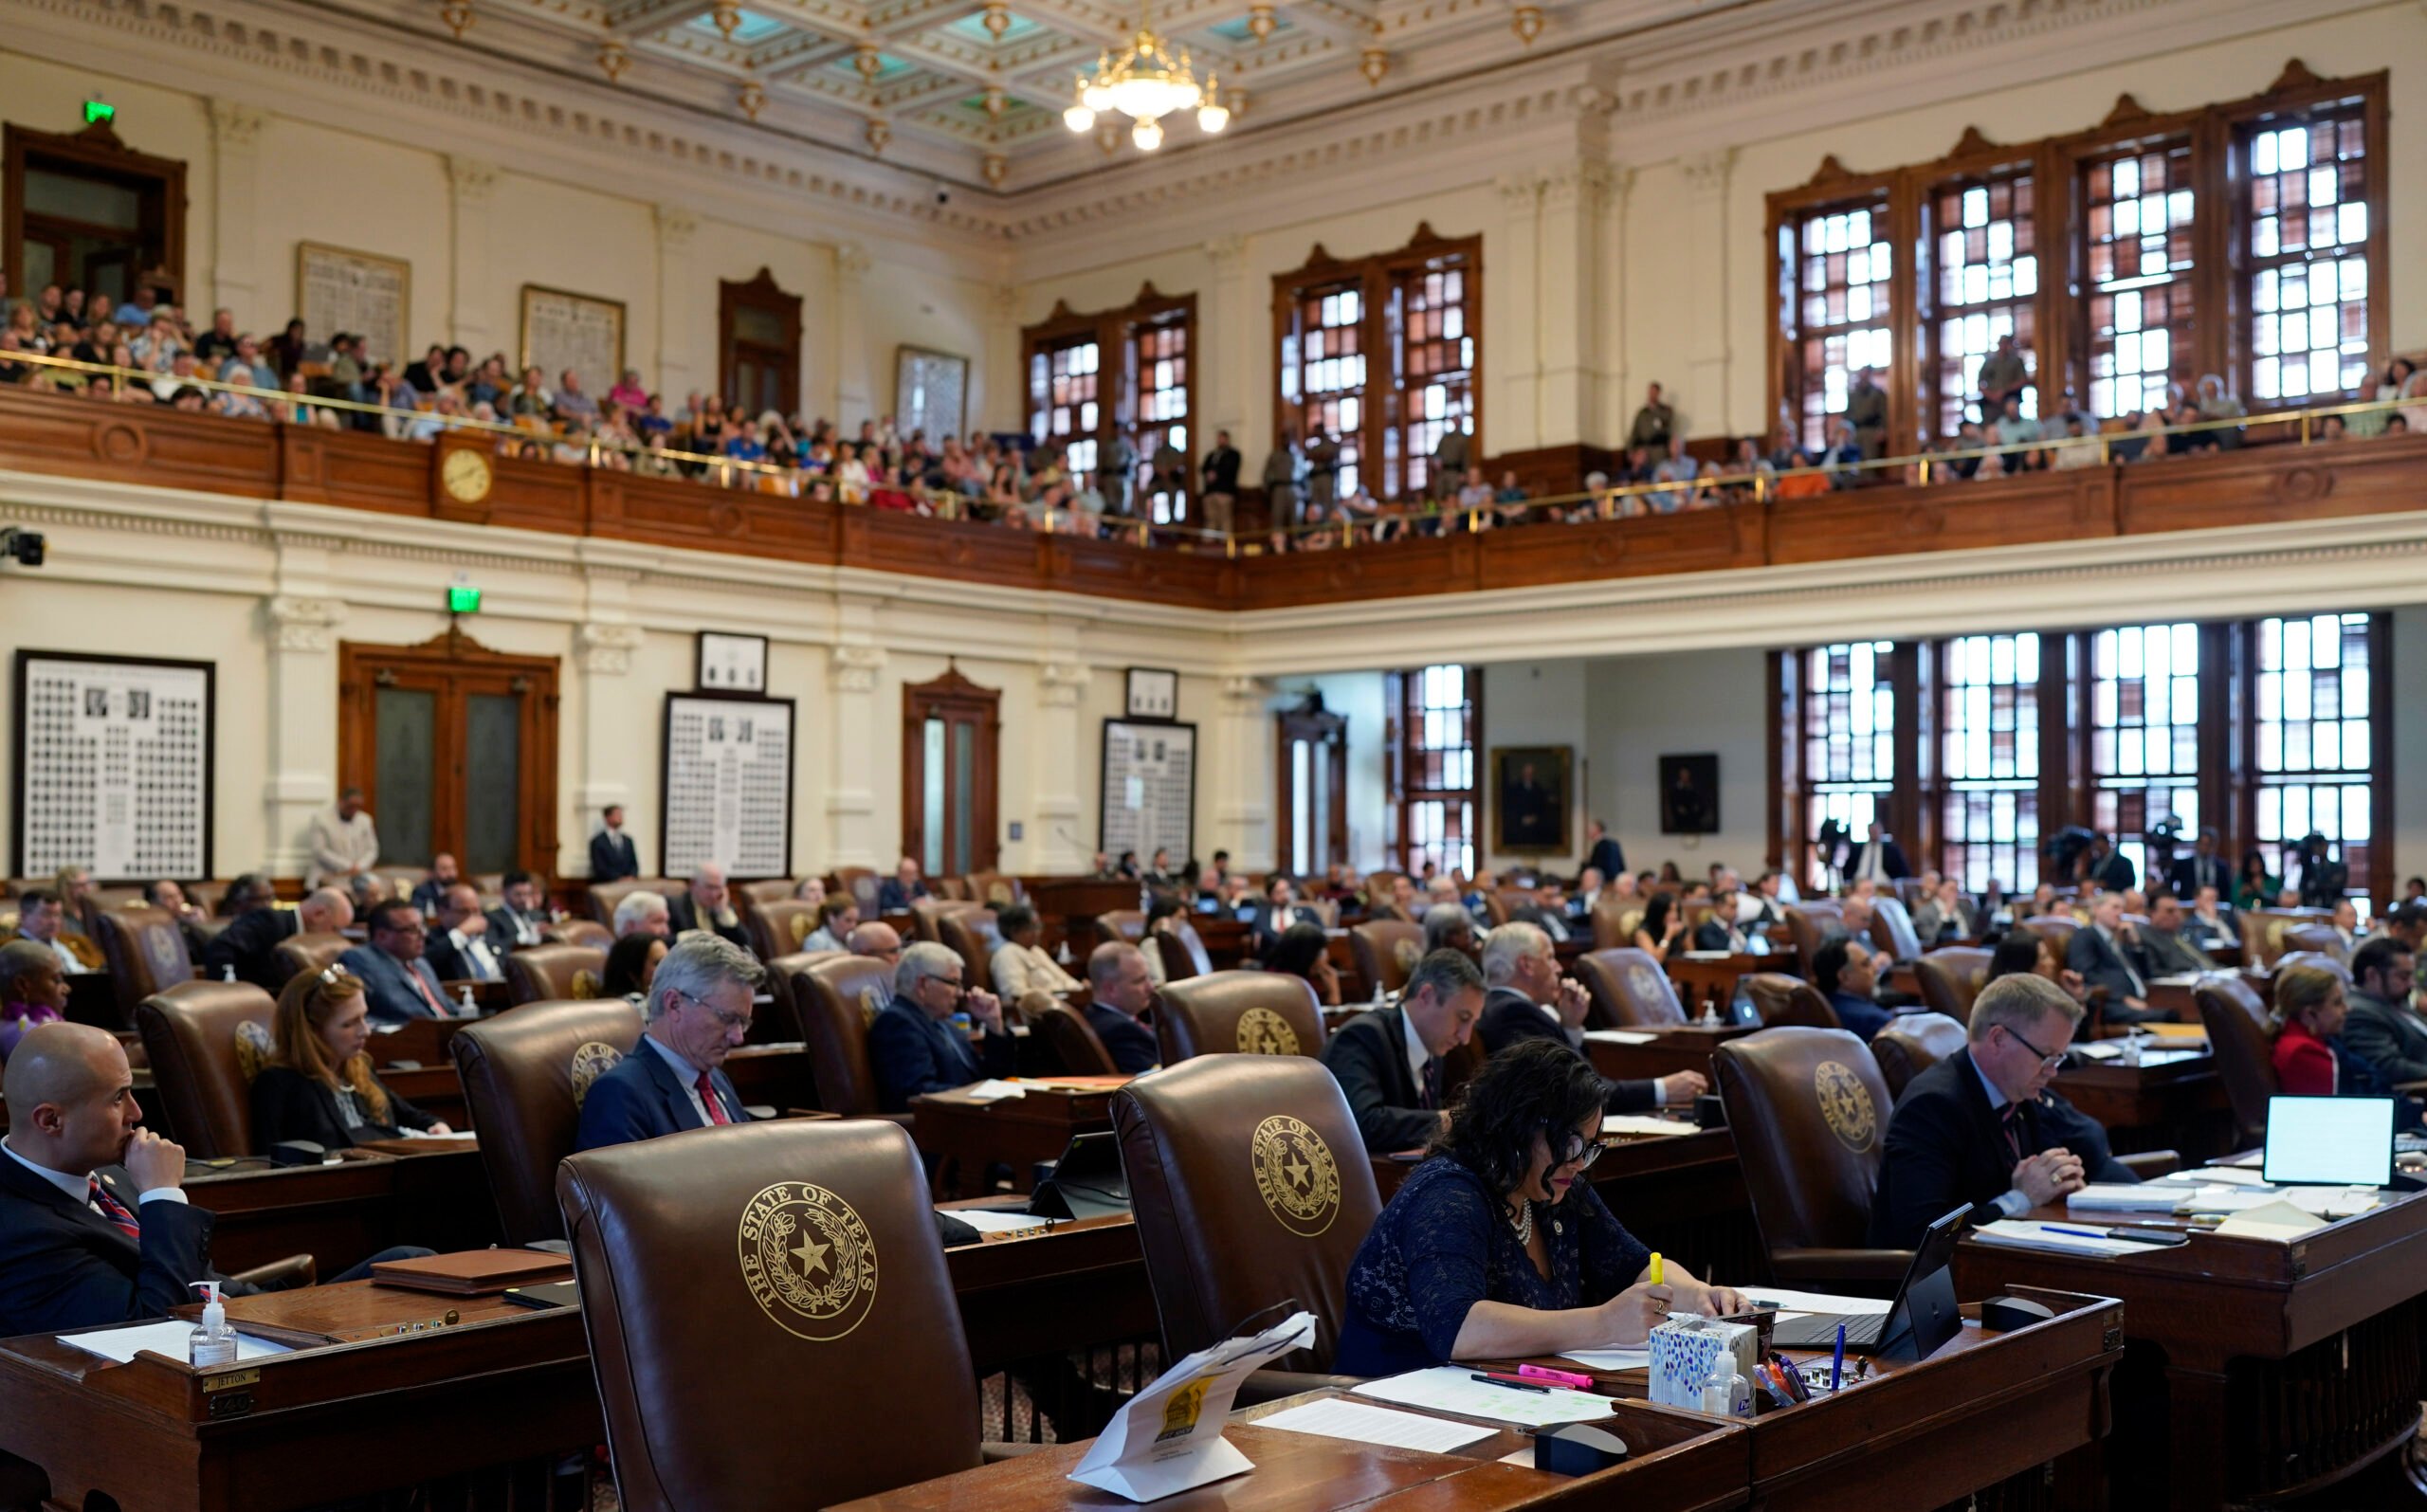 House members and visitors listen to the impeachment proceedings against state Attorney General Ken Paxton in the House Chamber at the Texas Capitol in Austin, Texas, Saturday, May 27, 2023. Texas lawmakers have issued 20 articles of impeachment against Paxton, ranging from bribery to abuse of public trust as state Republicans surged toward a swift and sudden vote that could remove him from office. (AP Photo/Eric Gay)